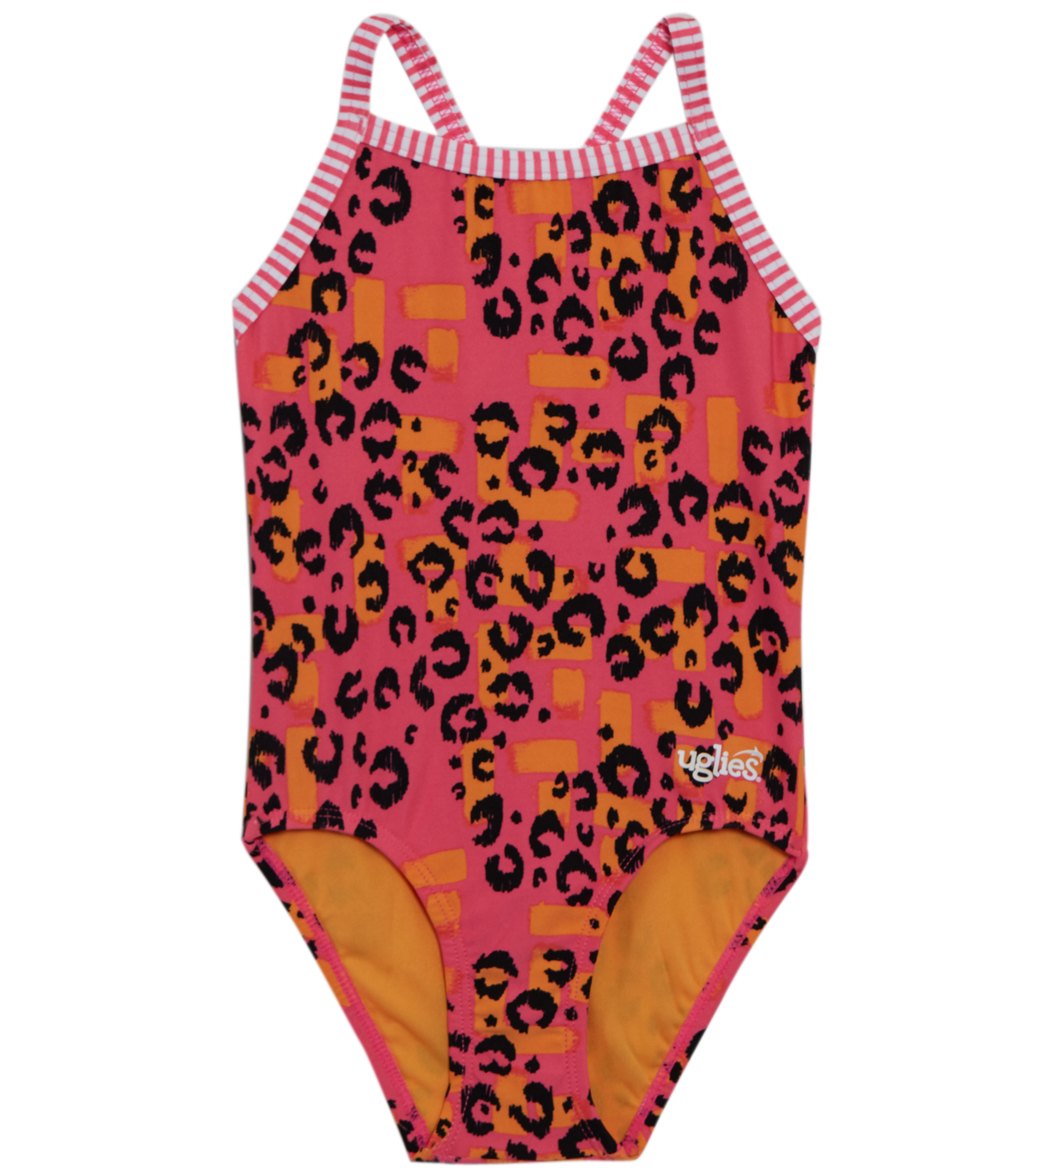 Dolfin Girls' Uglies Rawr One Piece Swimsuit at SwimOutlet.com